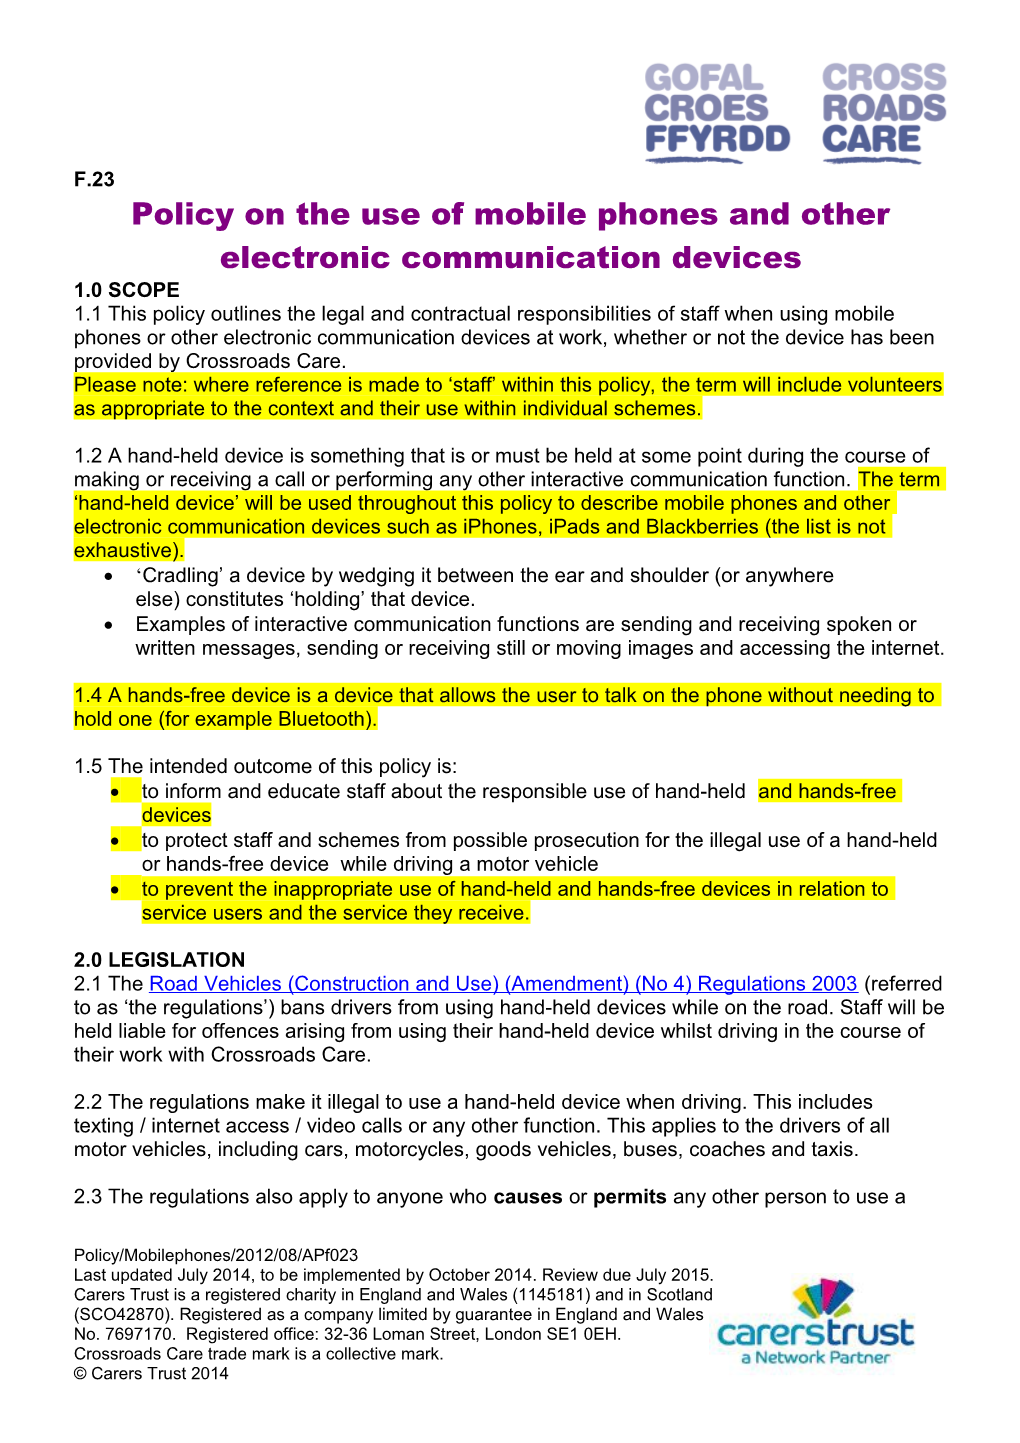 Policy on the Use of Mobile Phones and Other Electronic Communication Devices